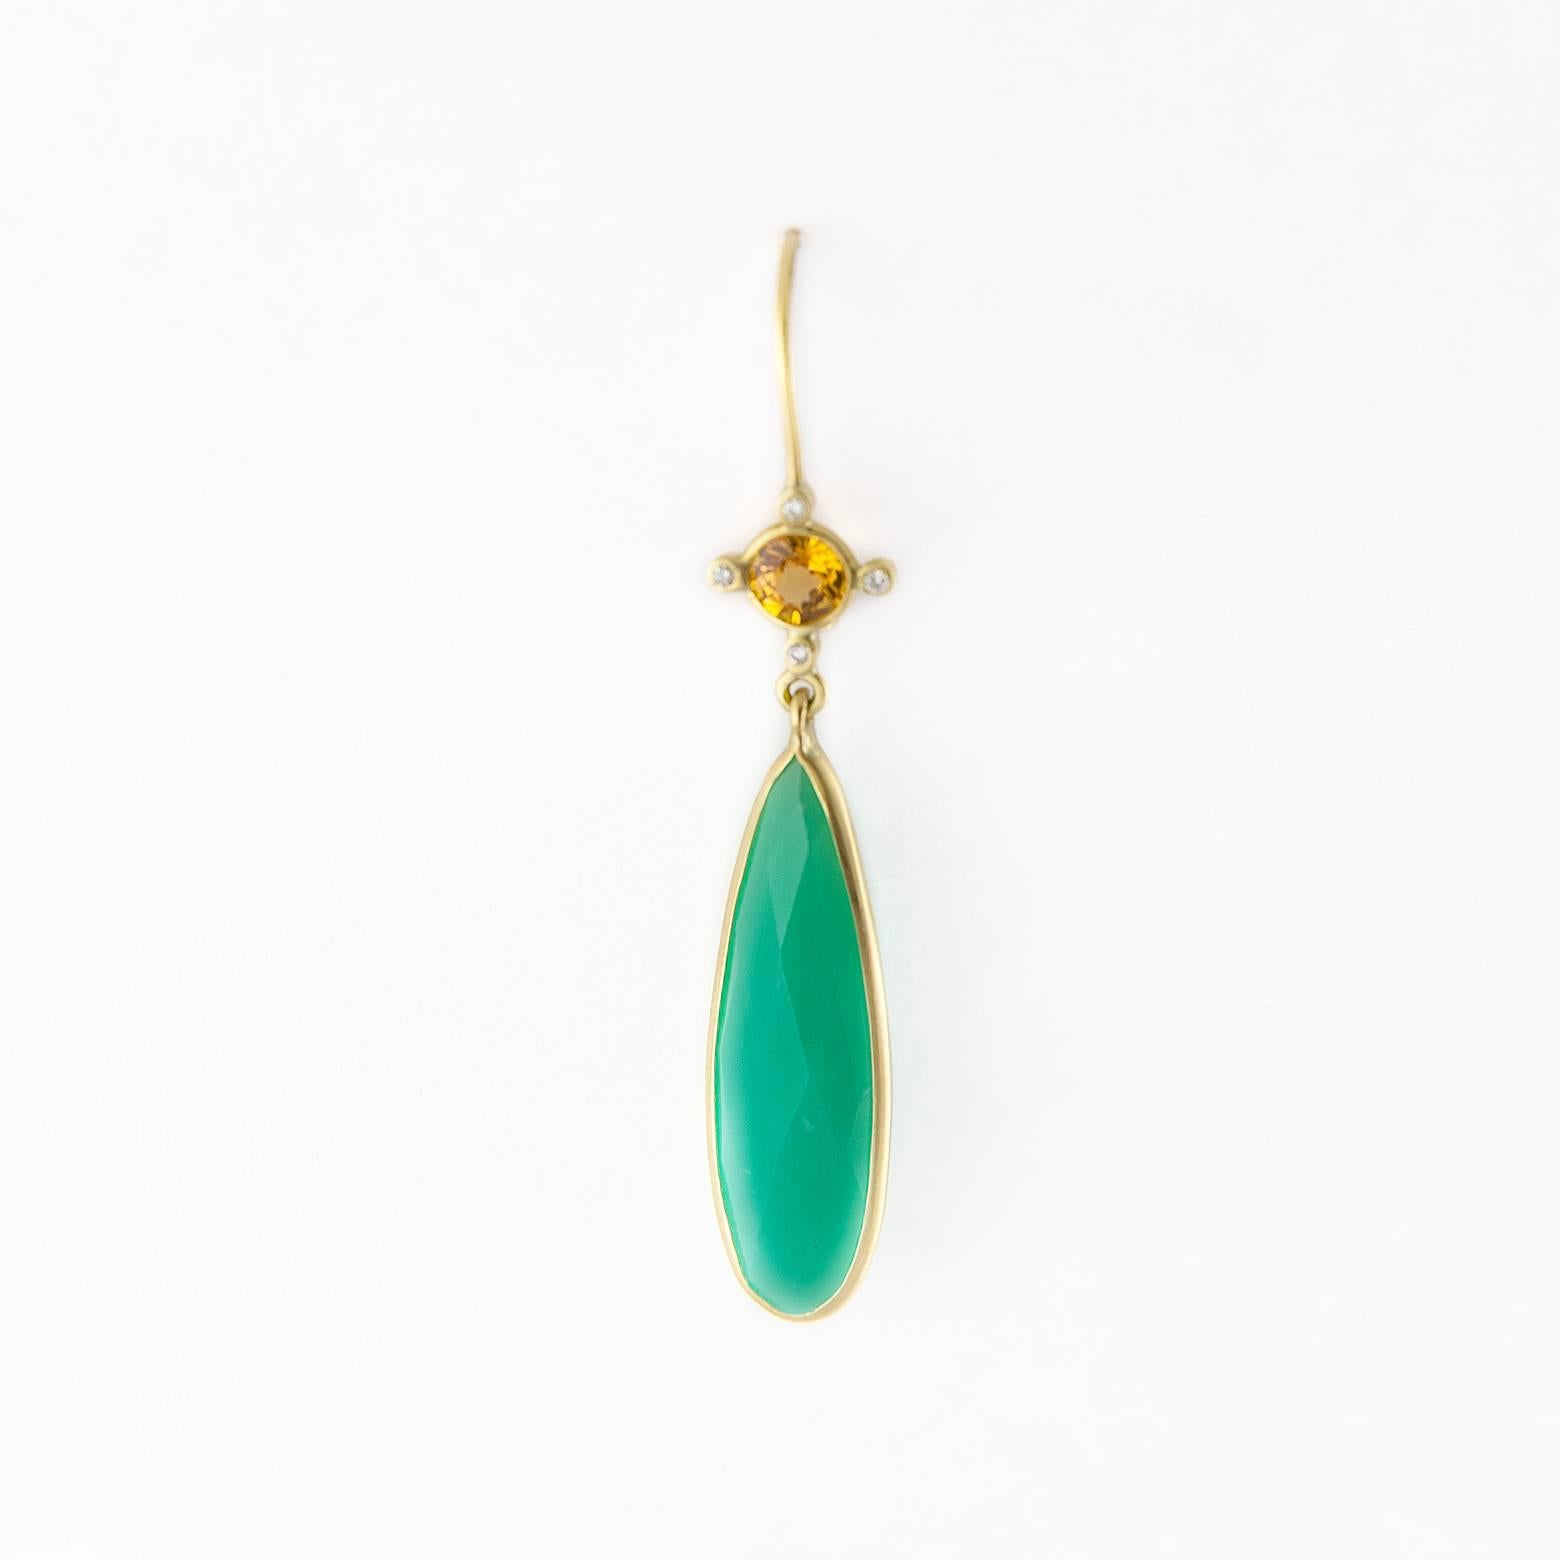 Bright Green Pear Chrysoprase Yellow Sapphire and Diamond Drop Earrings. These beauties exude summertime ease with bright yellow sapphire sun tops ordained with diamonds in every cardinal direction. Elegant and breezy they stand out bright against a